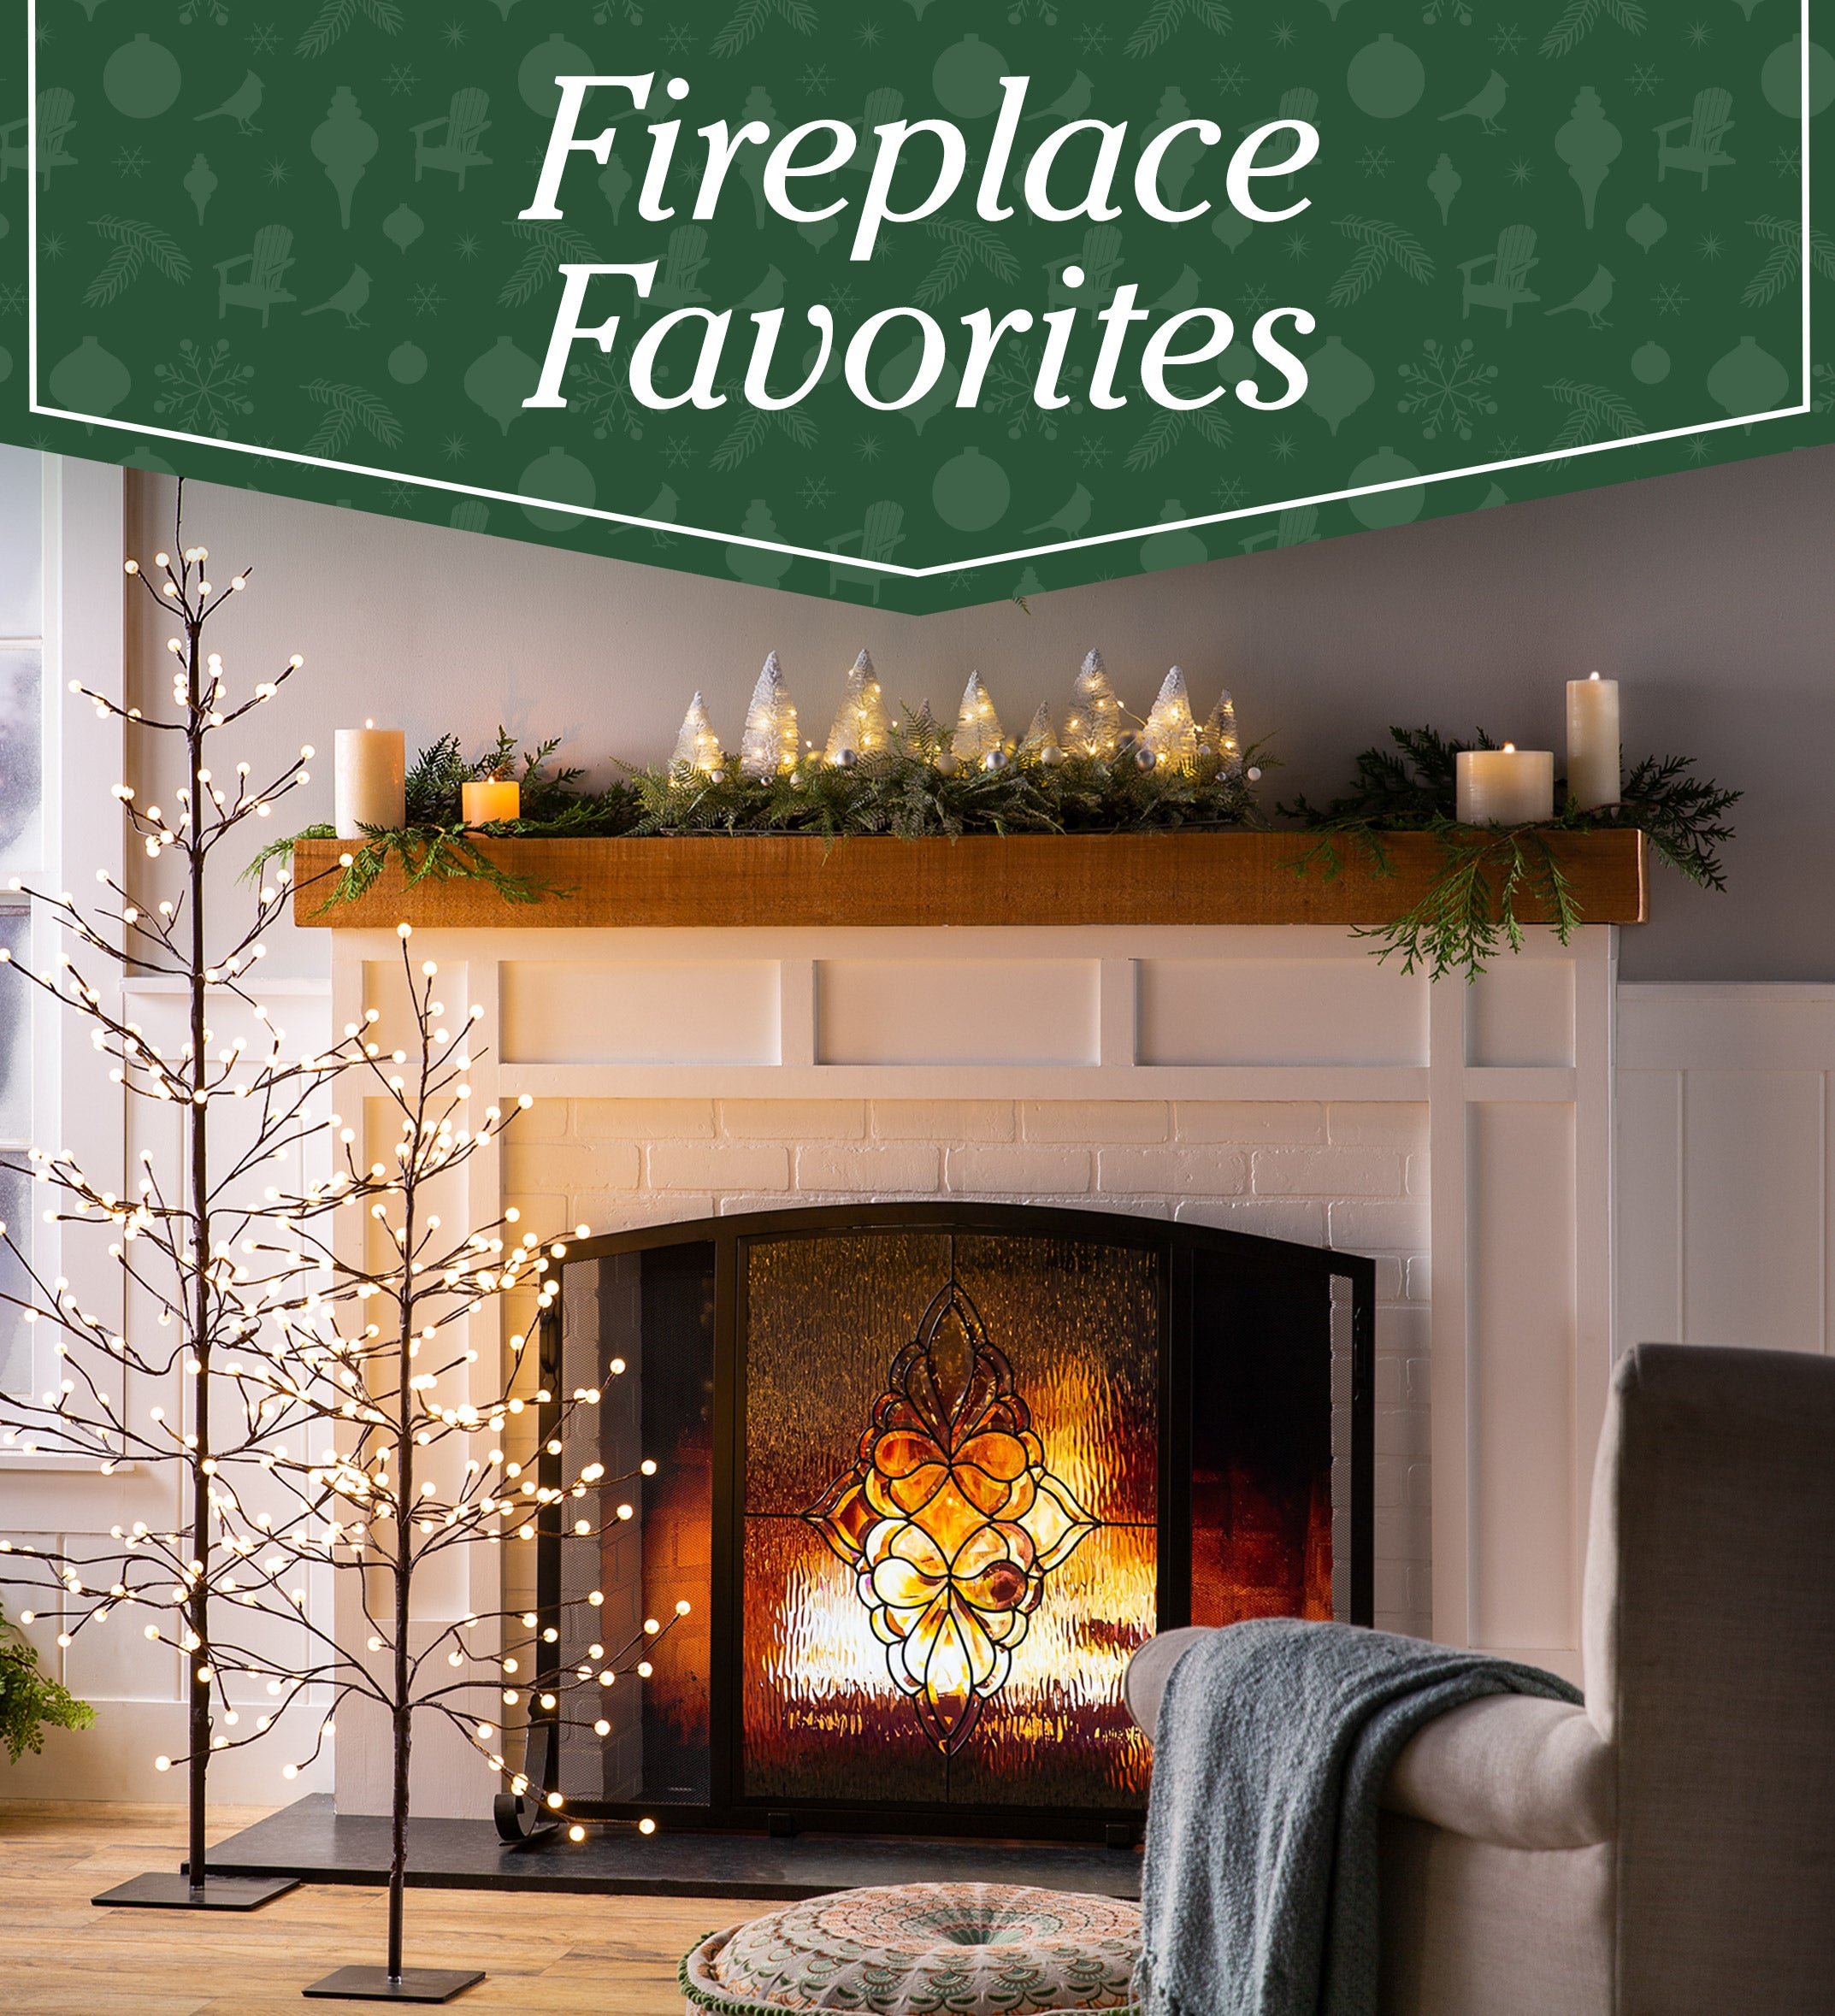 Image of St Charles Glass Medallion Fire Screen. Fireplace Favorites UP TO 80% OFF